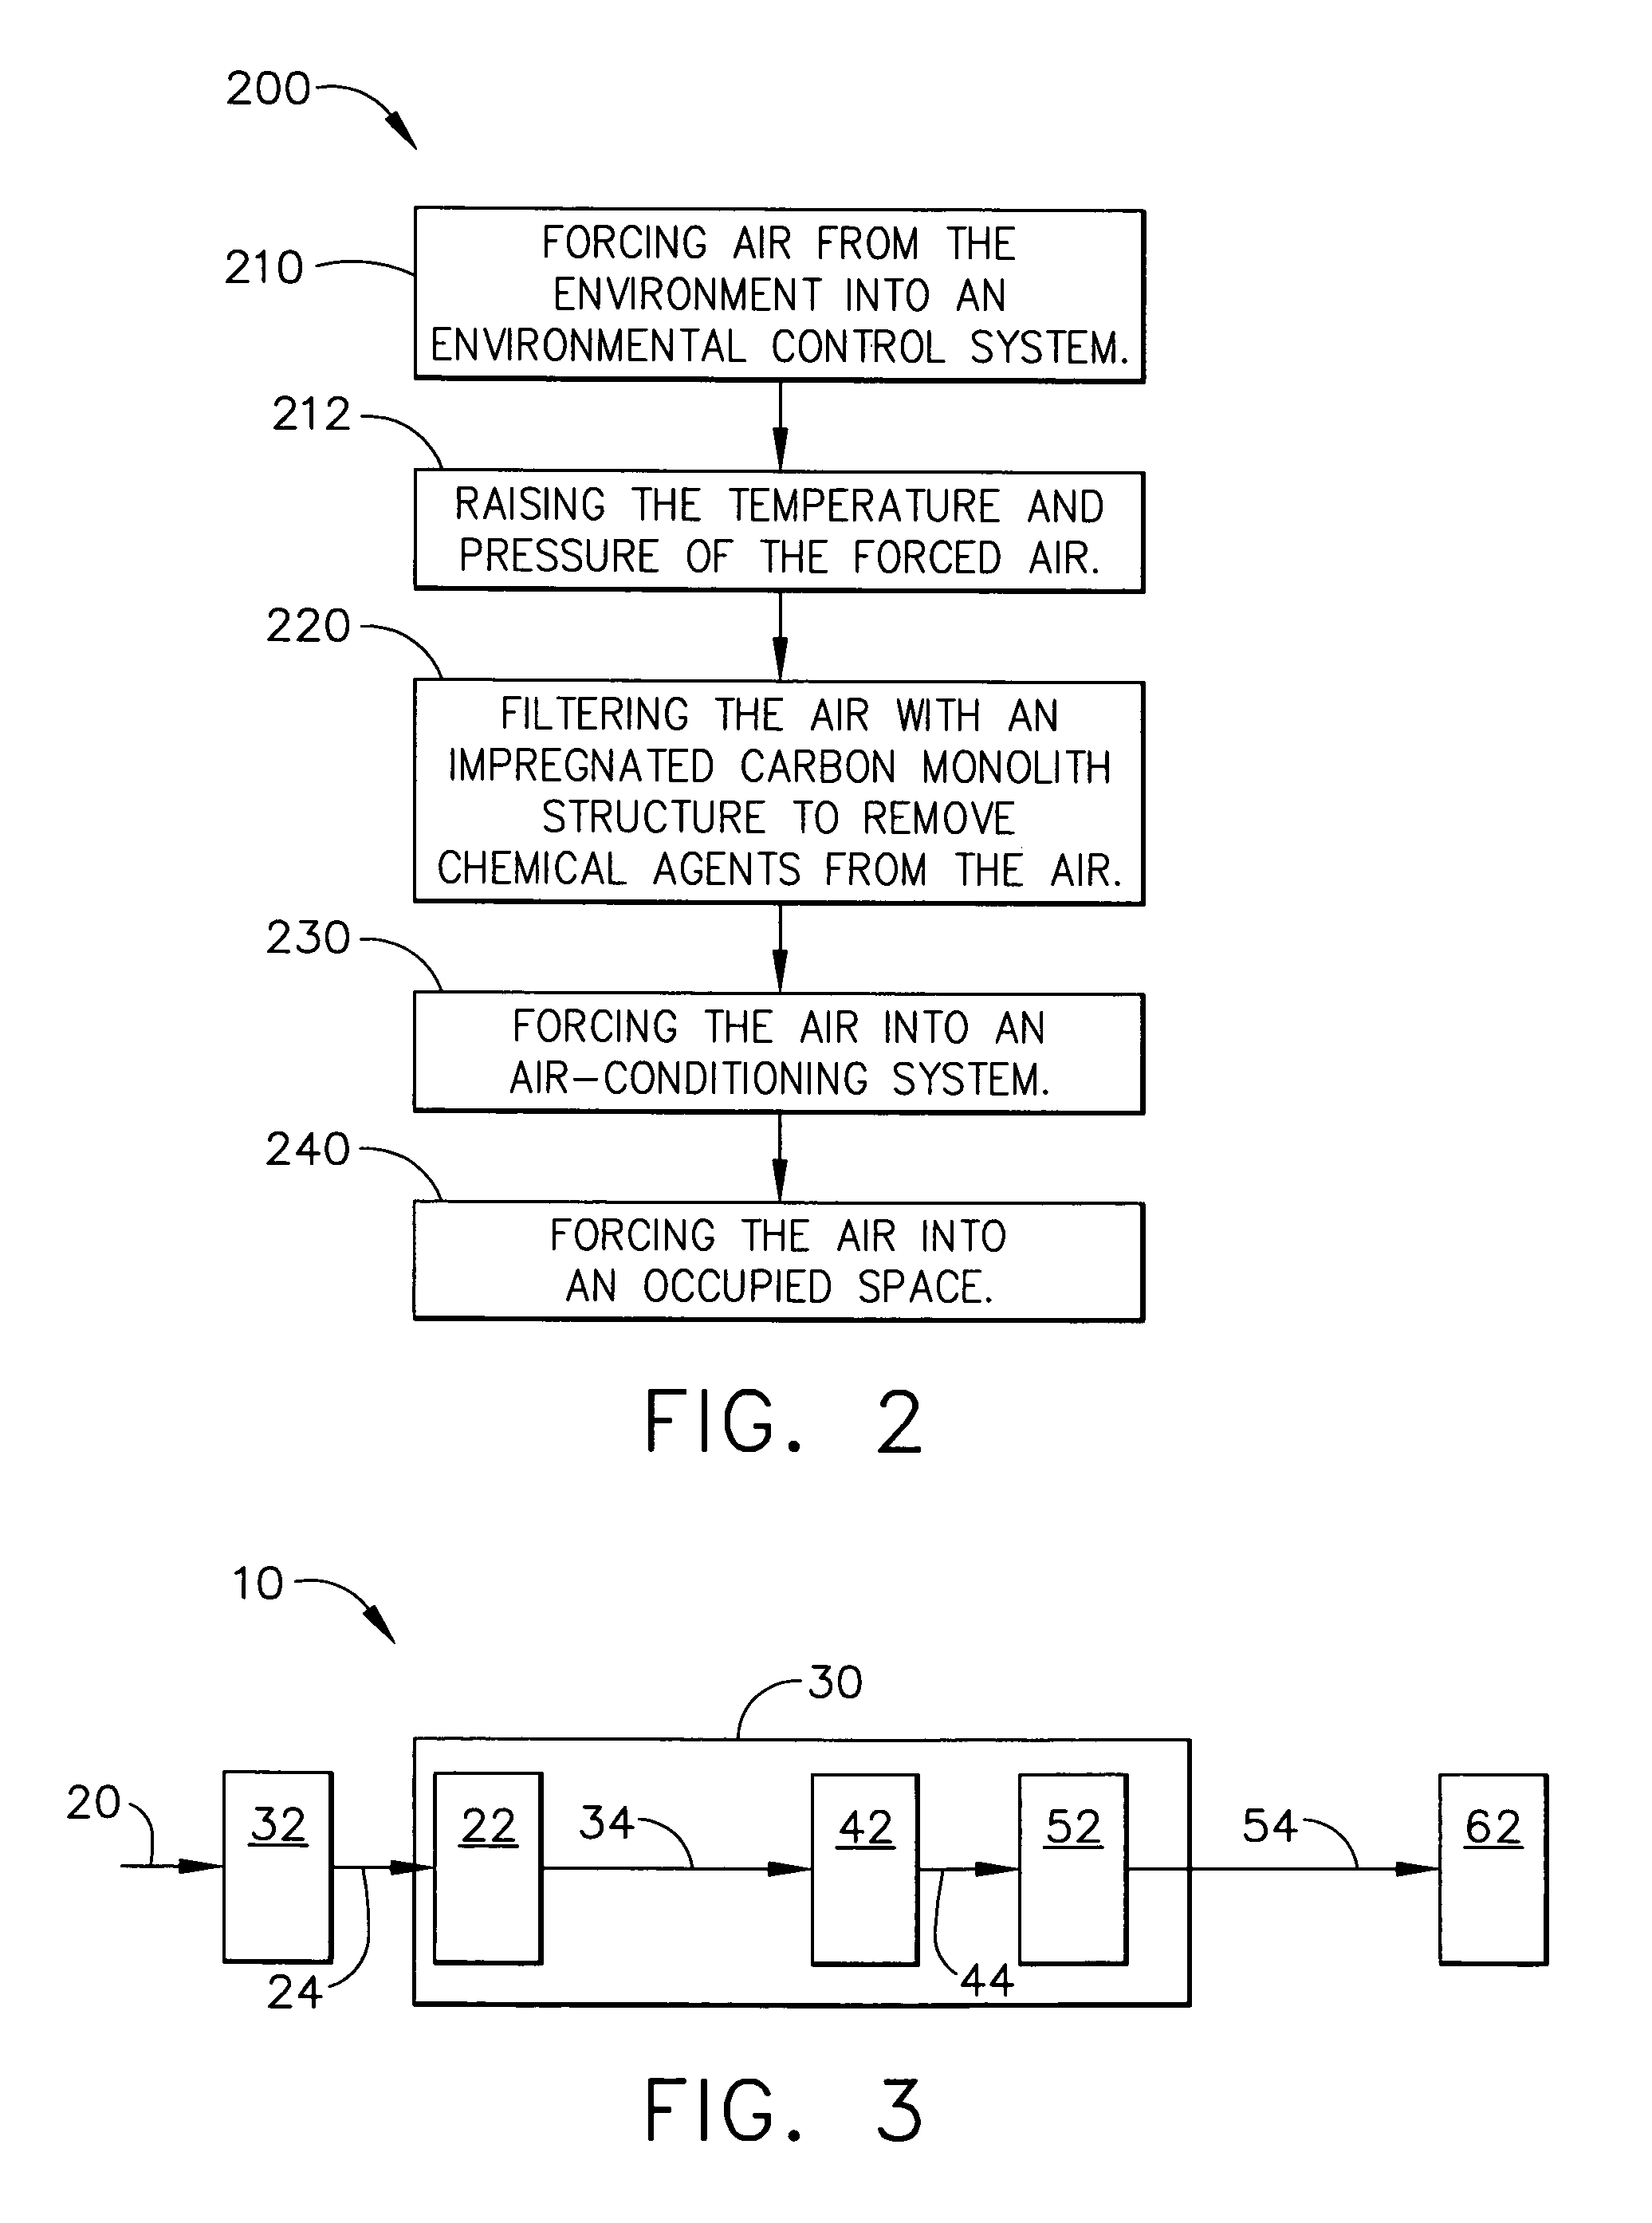 Structured adsorbent media for purifying contaminated air